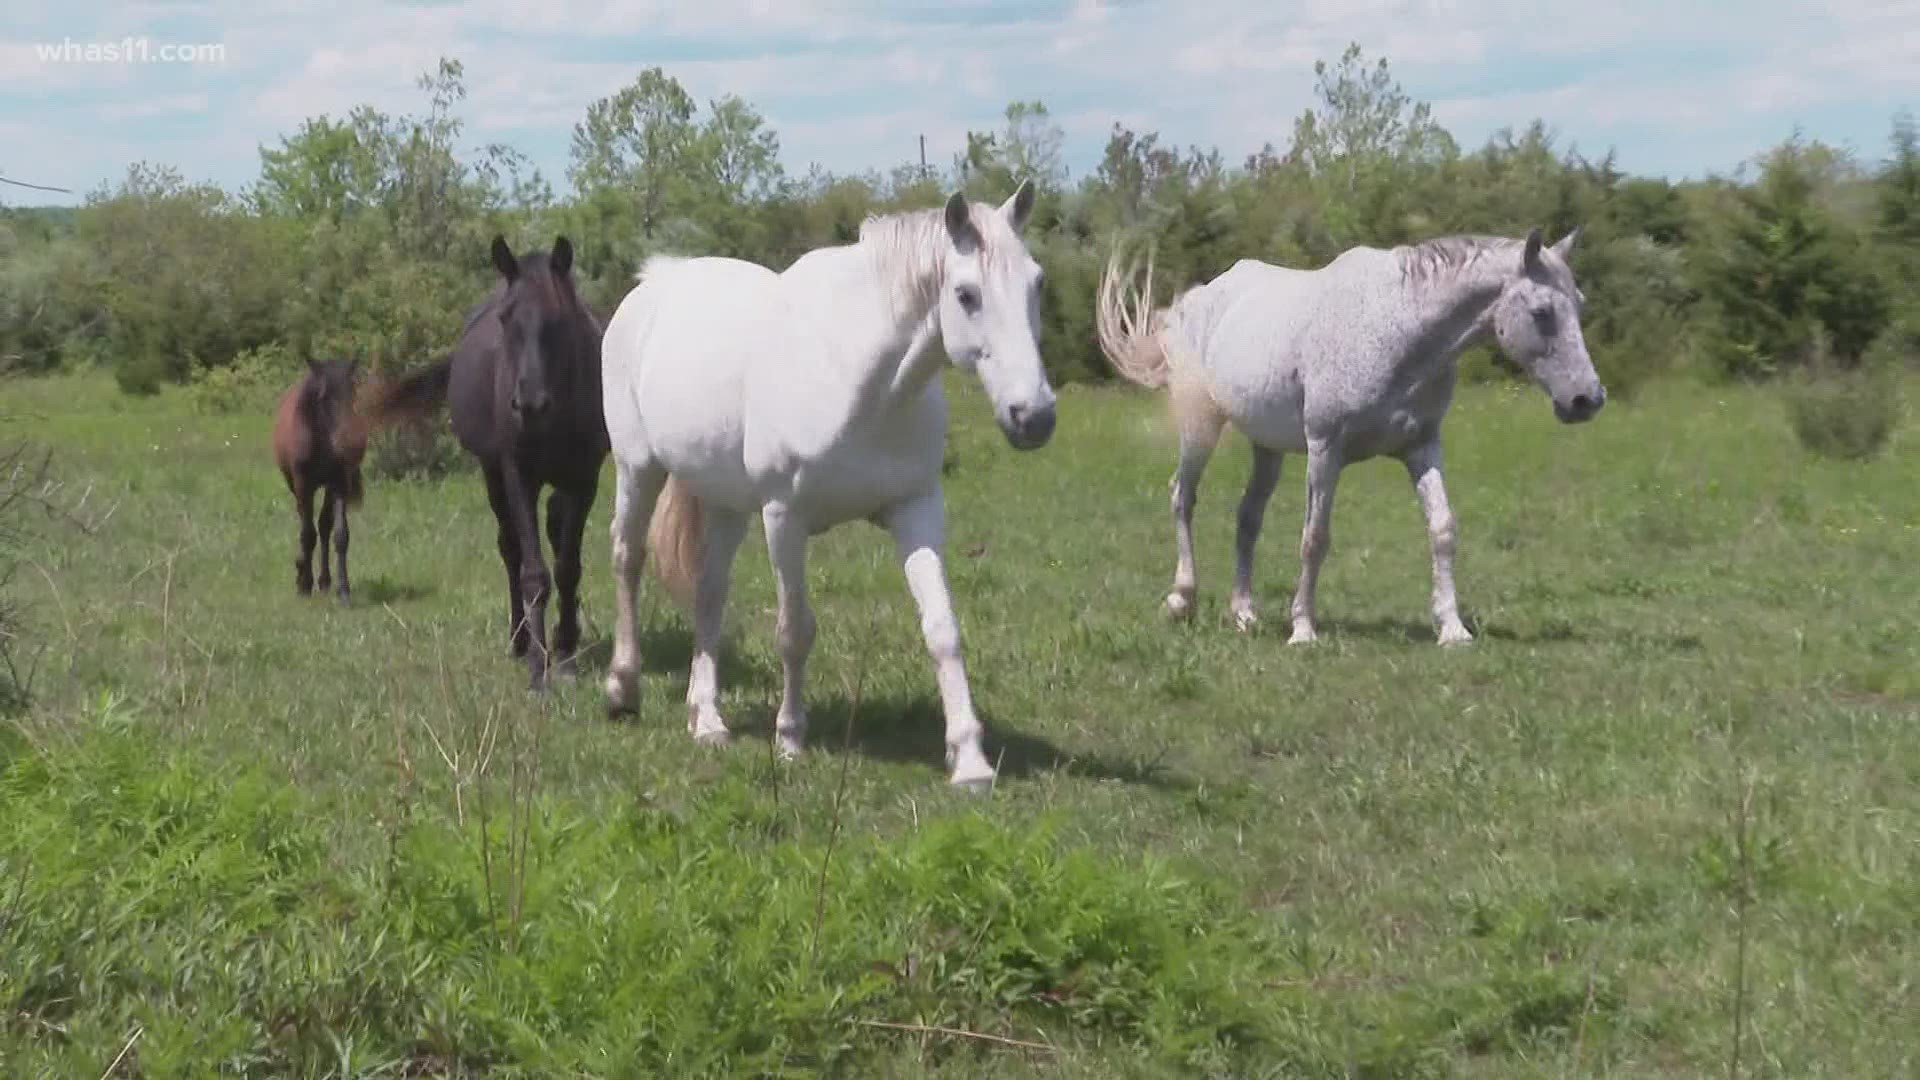 Among abandoned coal mines in the mountains of Eastern Kentucky, horses roam free in horse heaven thanks to a group of volunteers.